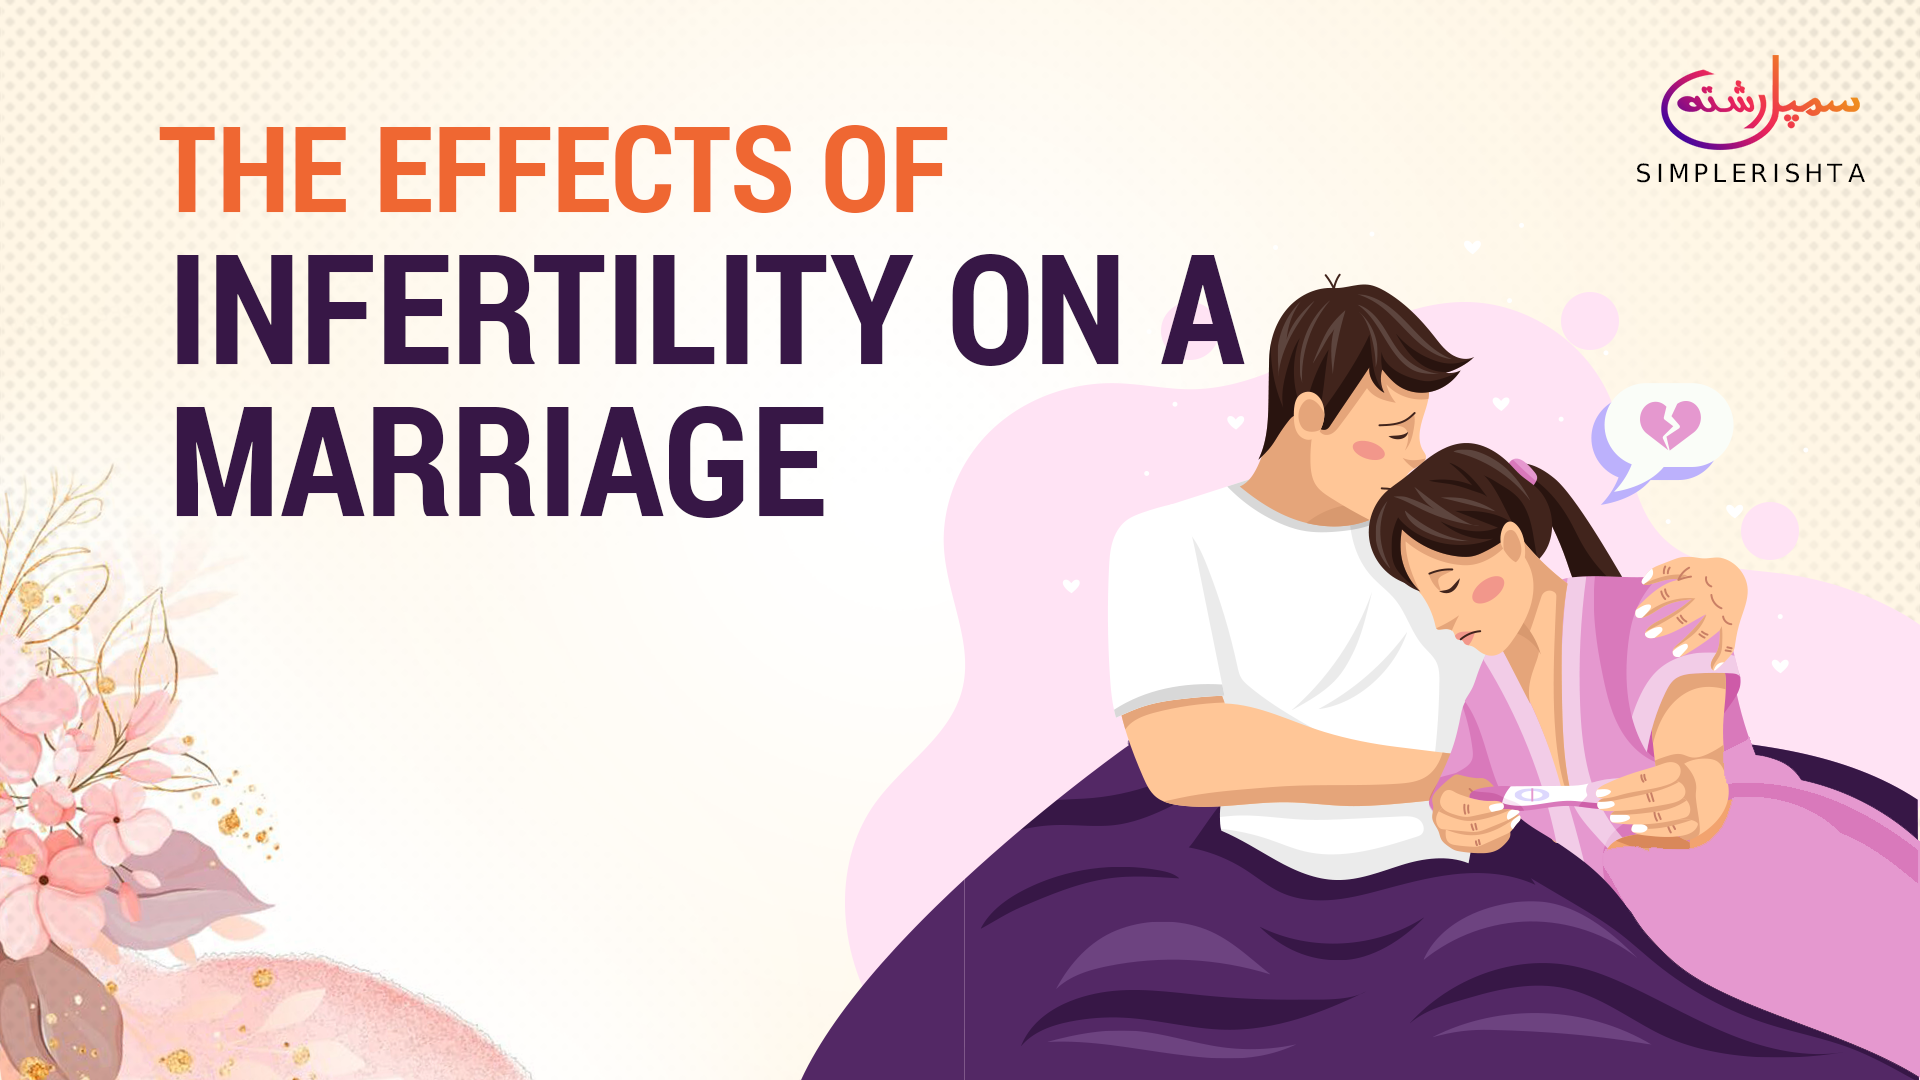 The Effects of Infertility on a Marriage